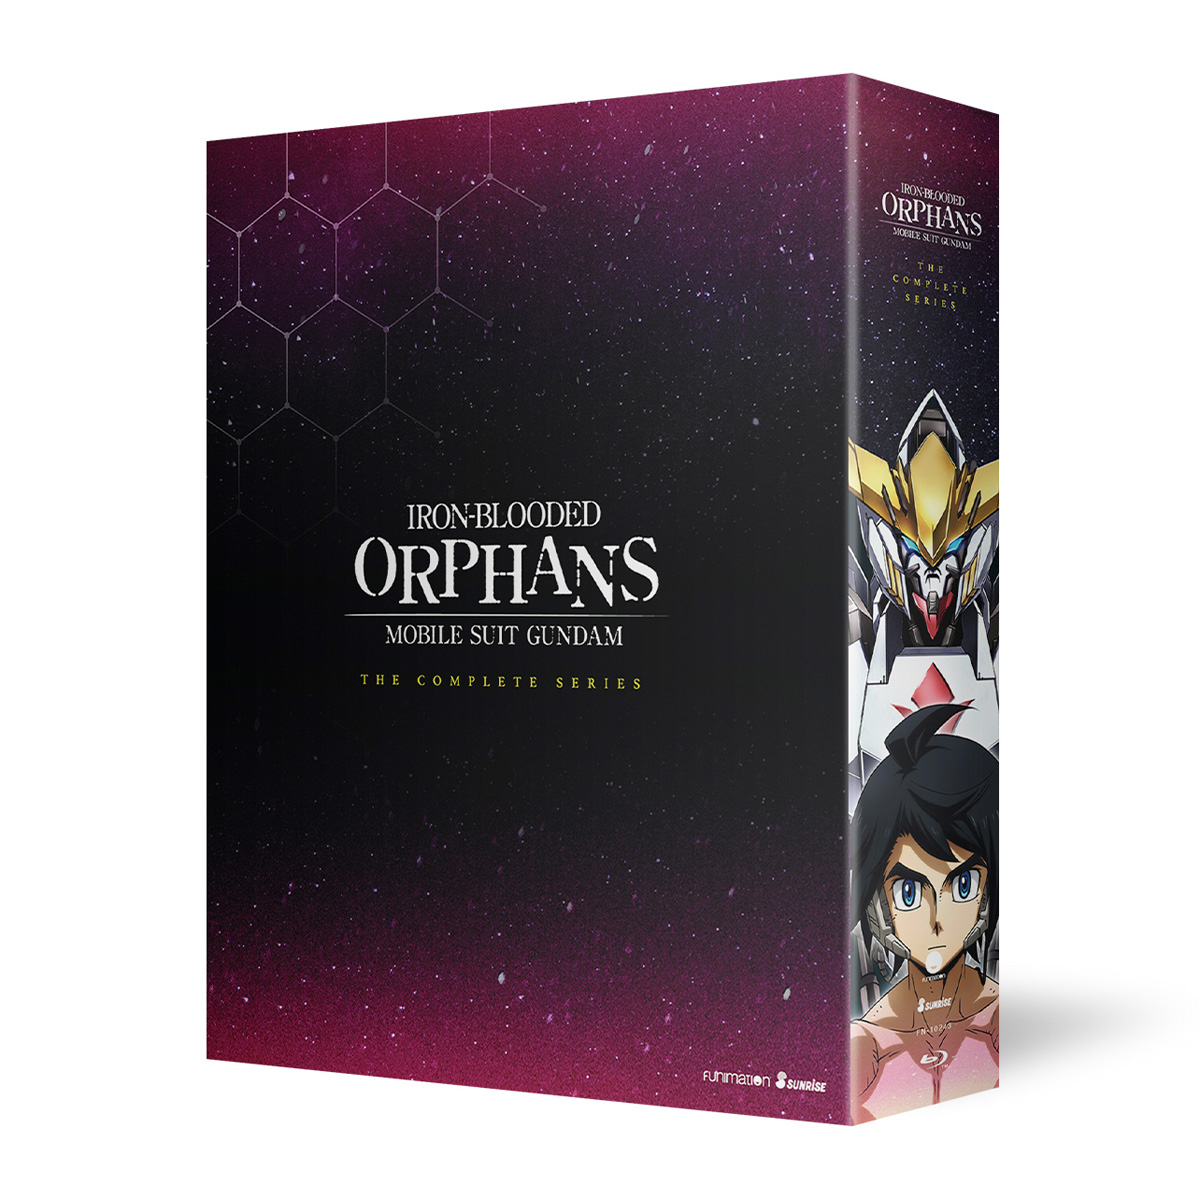 Mobile Suit Gundam: Iron-Blooded Orphans - The Complete Series - Blu-ray image count 3